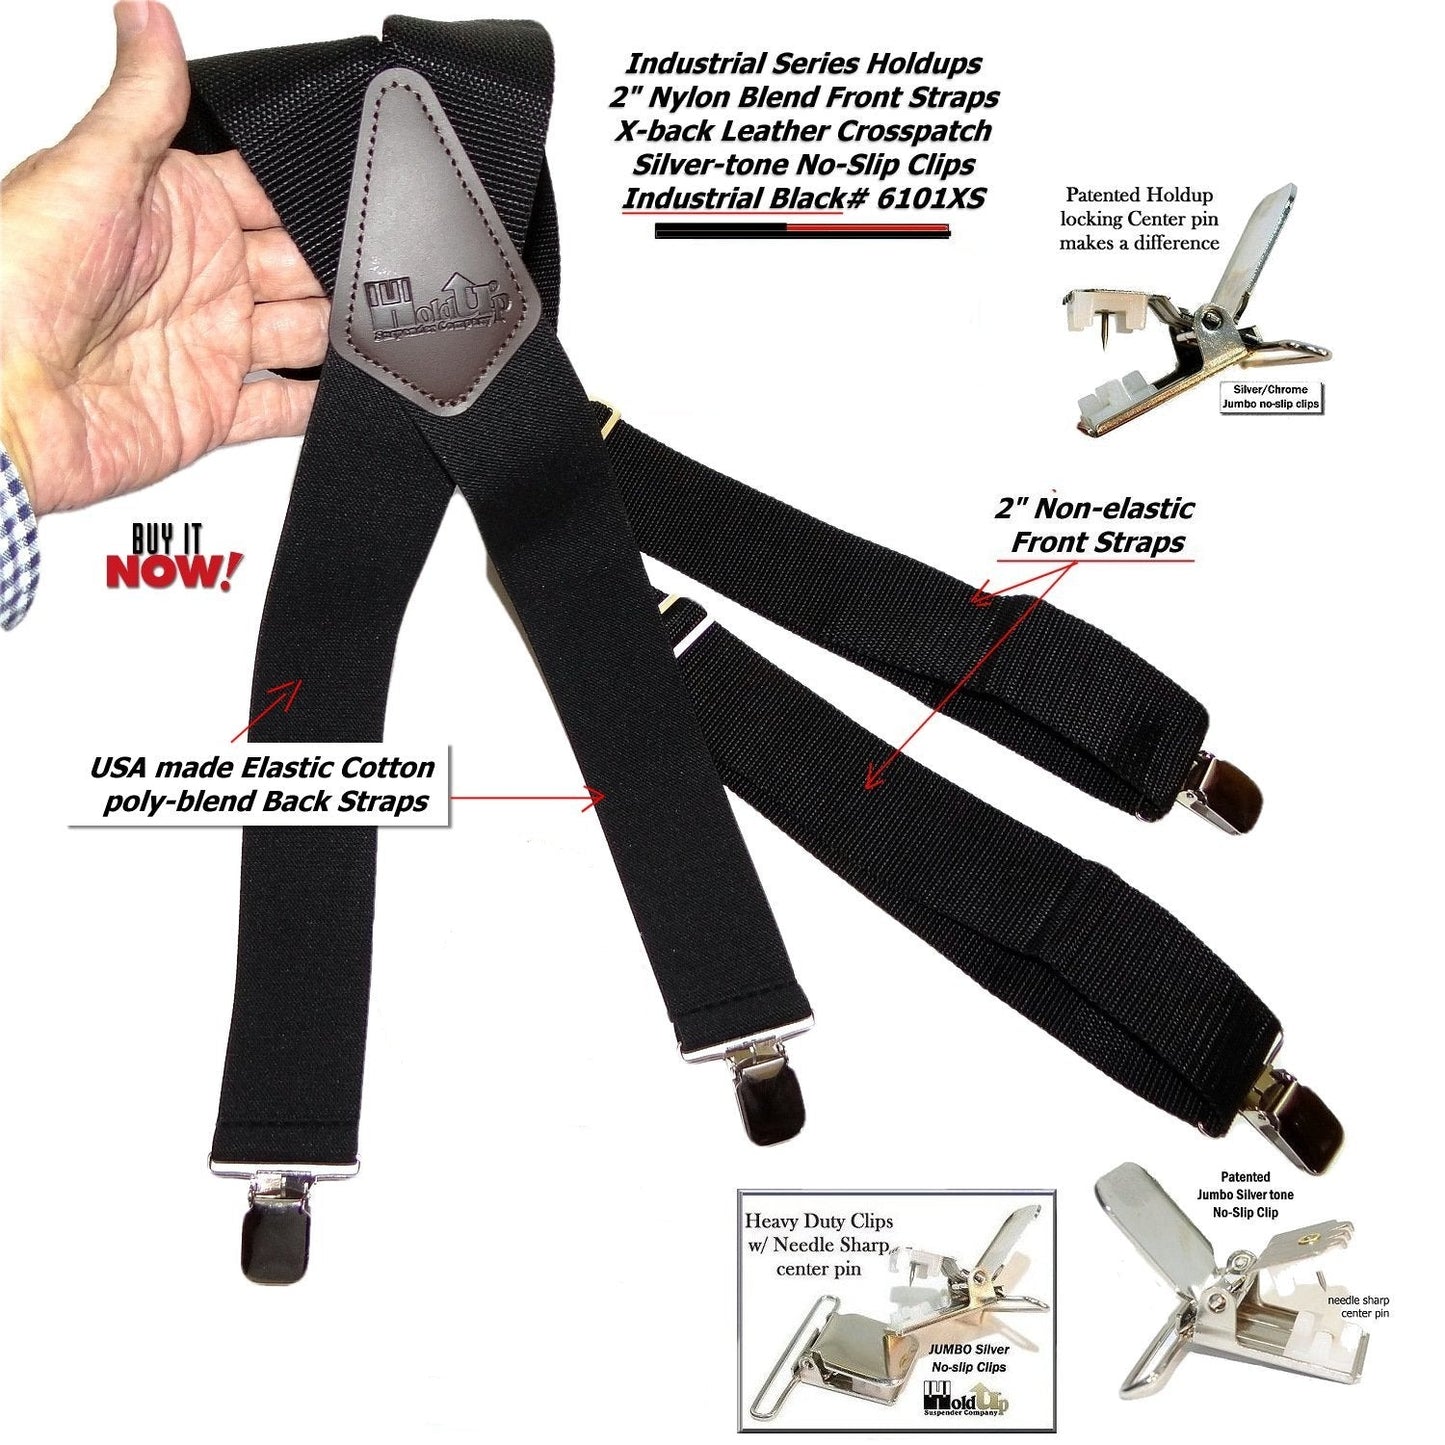 Hold-Ups Black Industrial 2" Wide Non-elastic Suspenders with No-slip Jumbo Silver no-slip clips